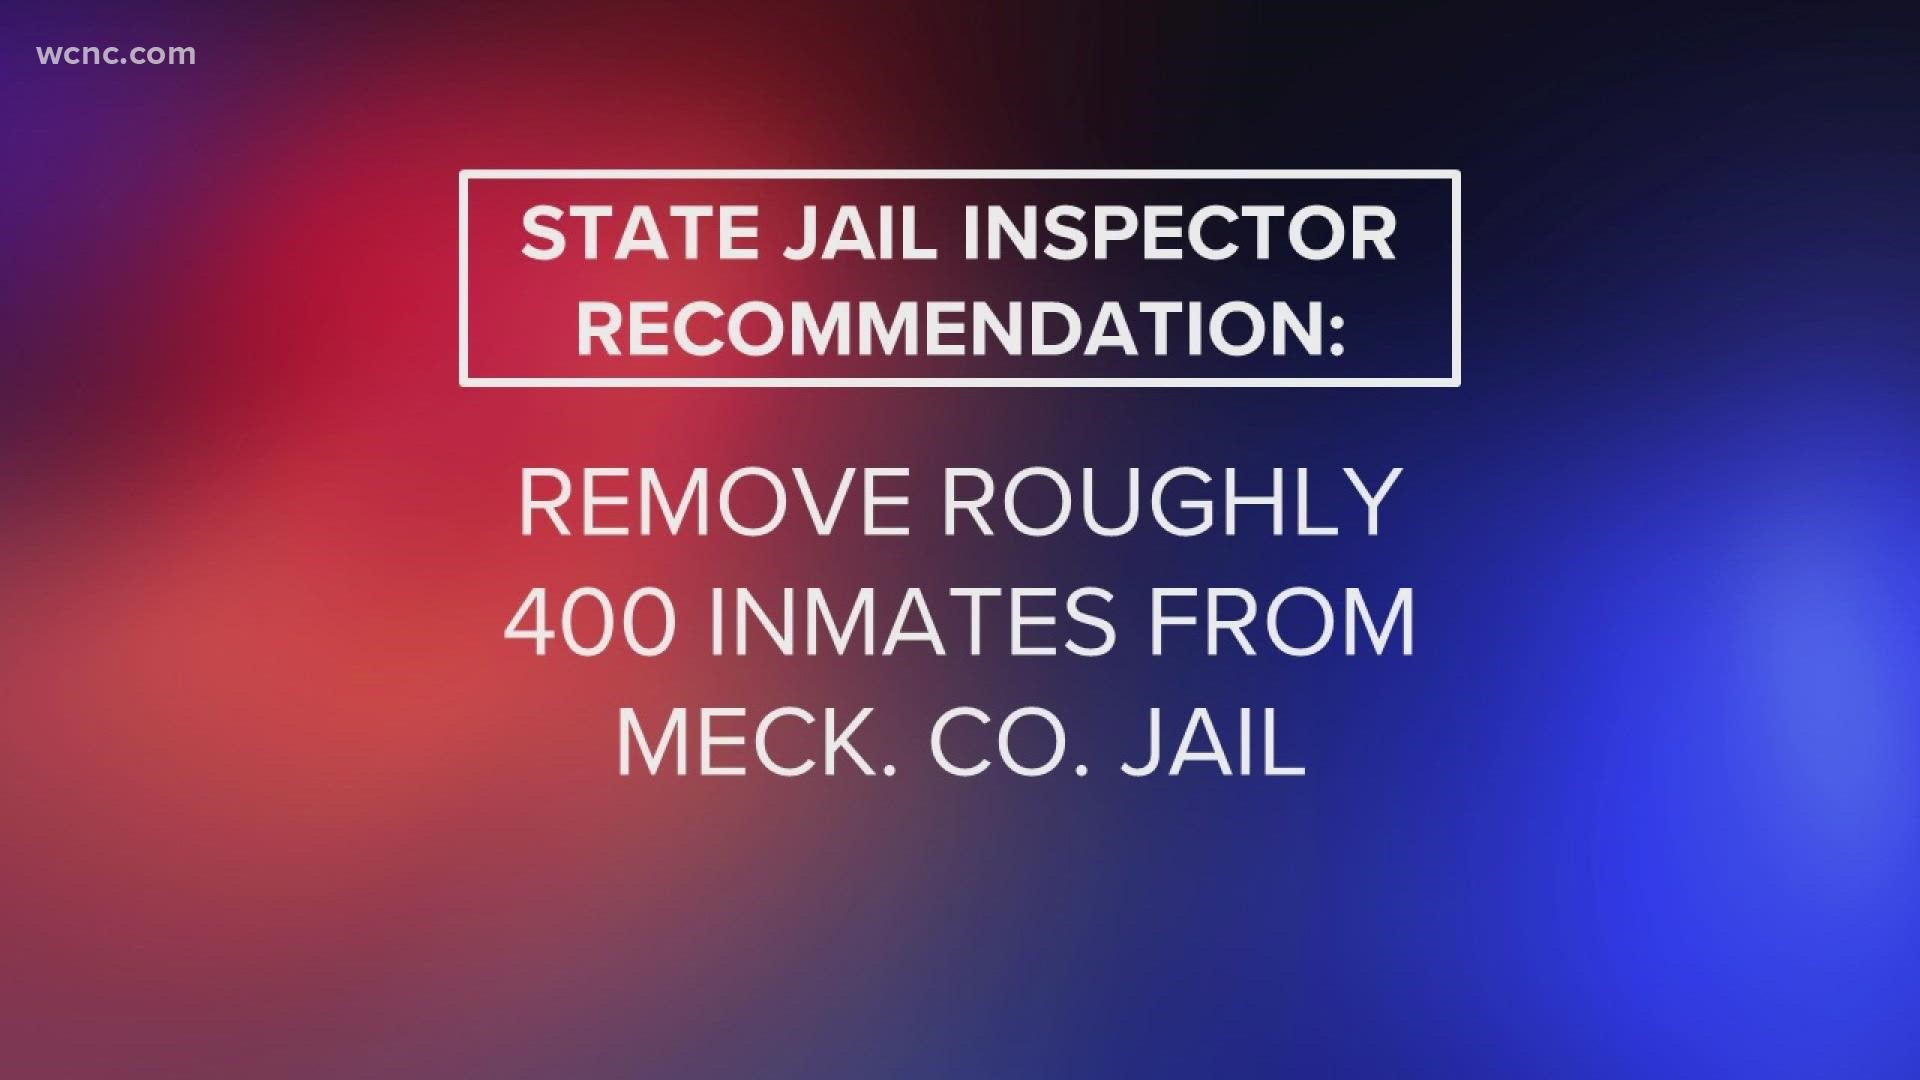 The state inspection follows a WCNC Charlotte investigation that identified growing violence against guards and a violation of minimum standards.